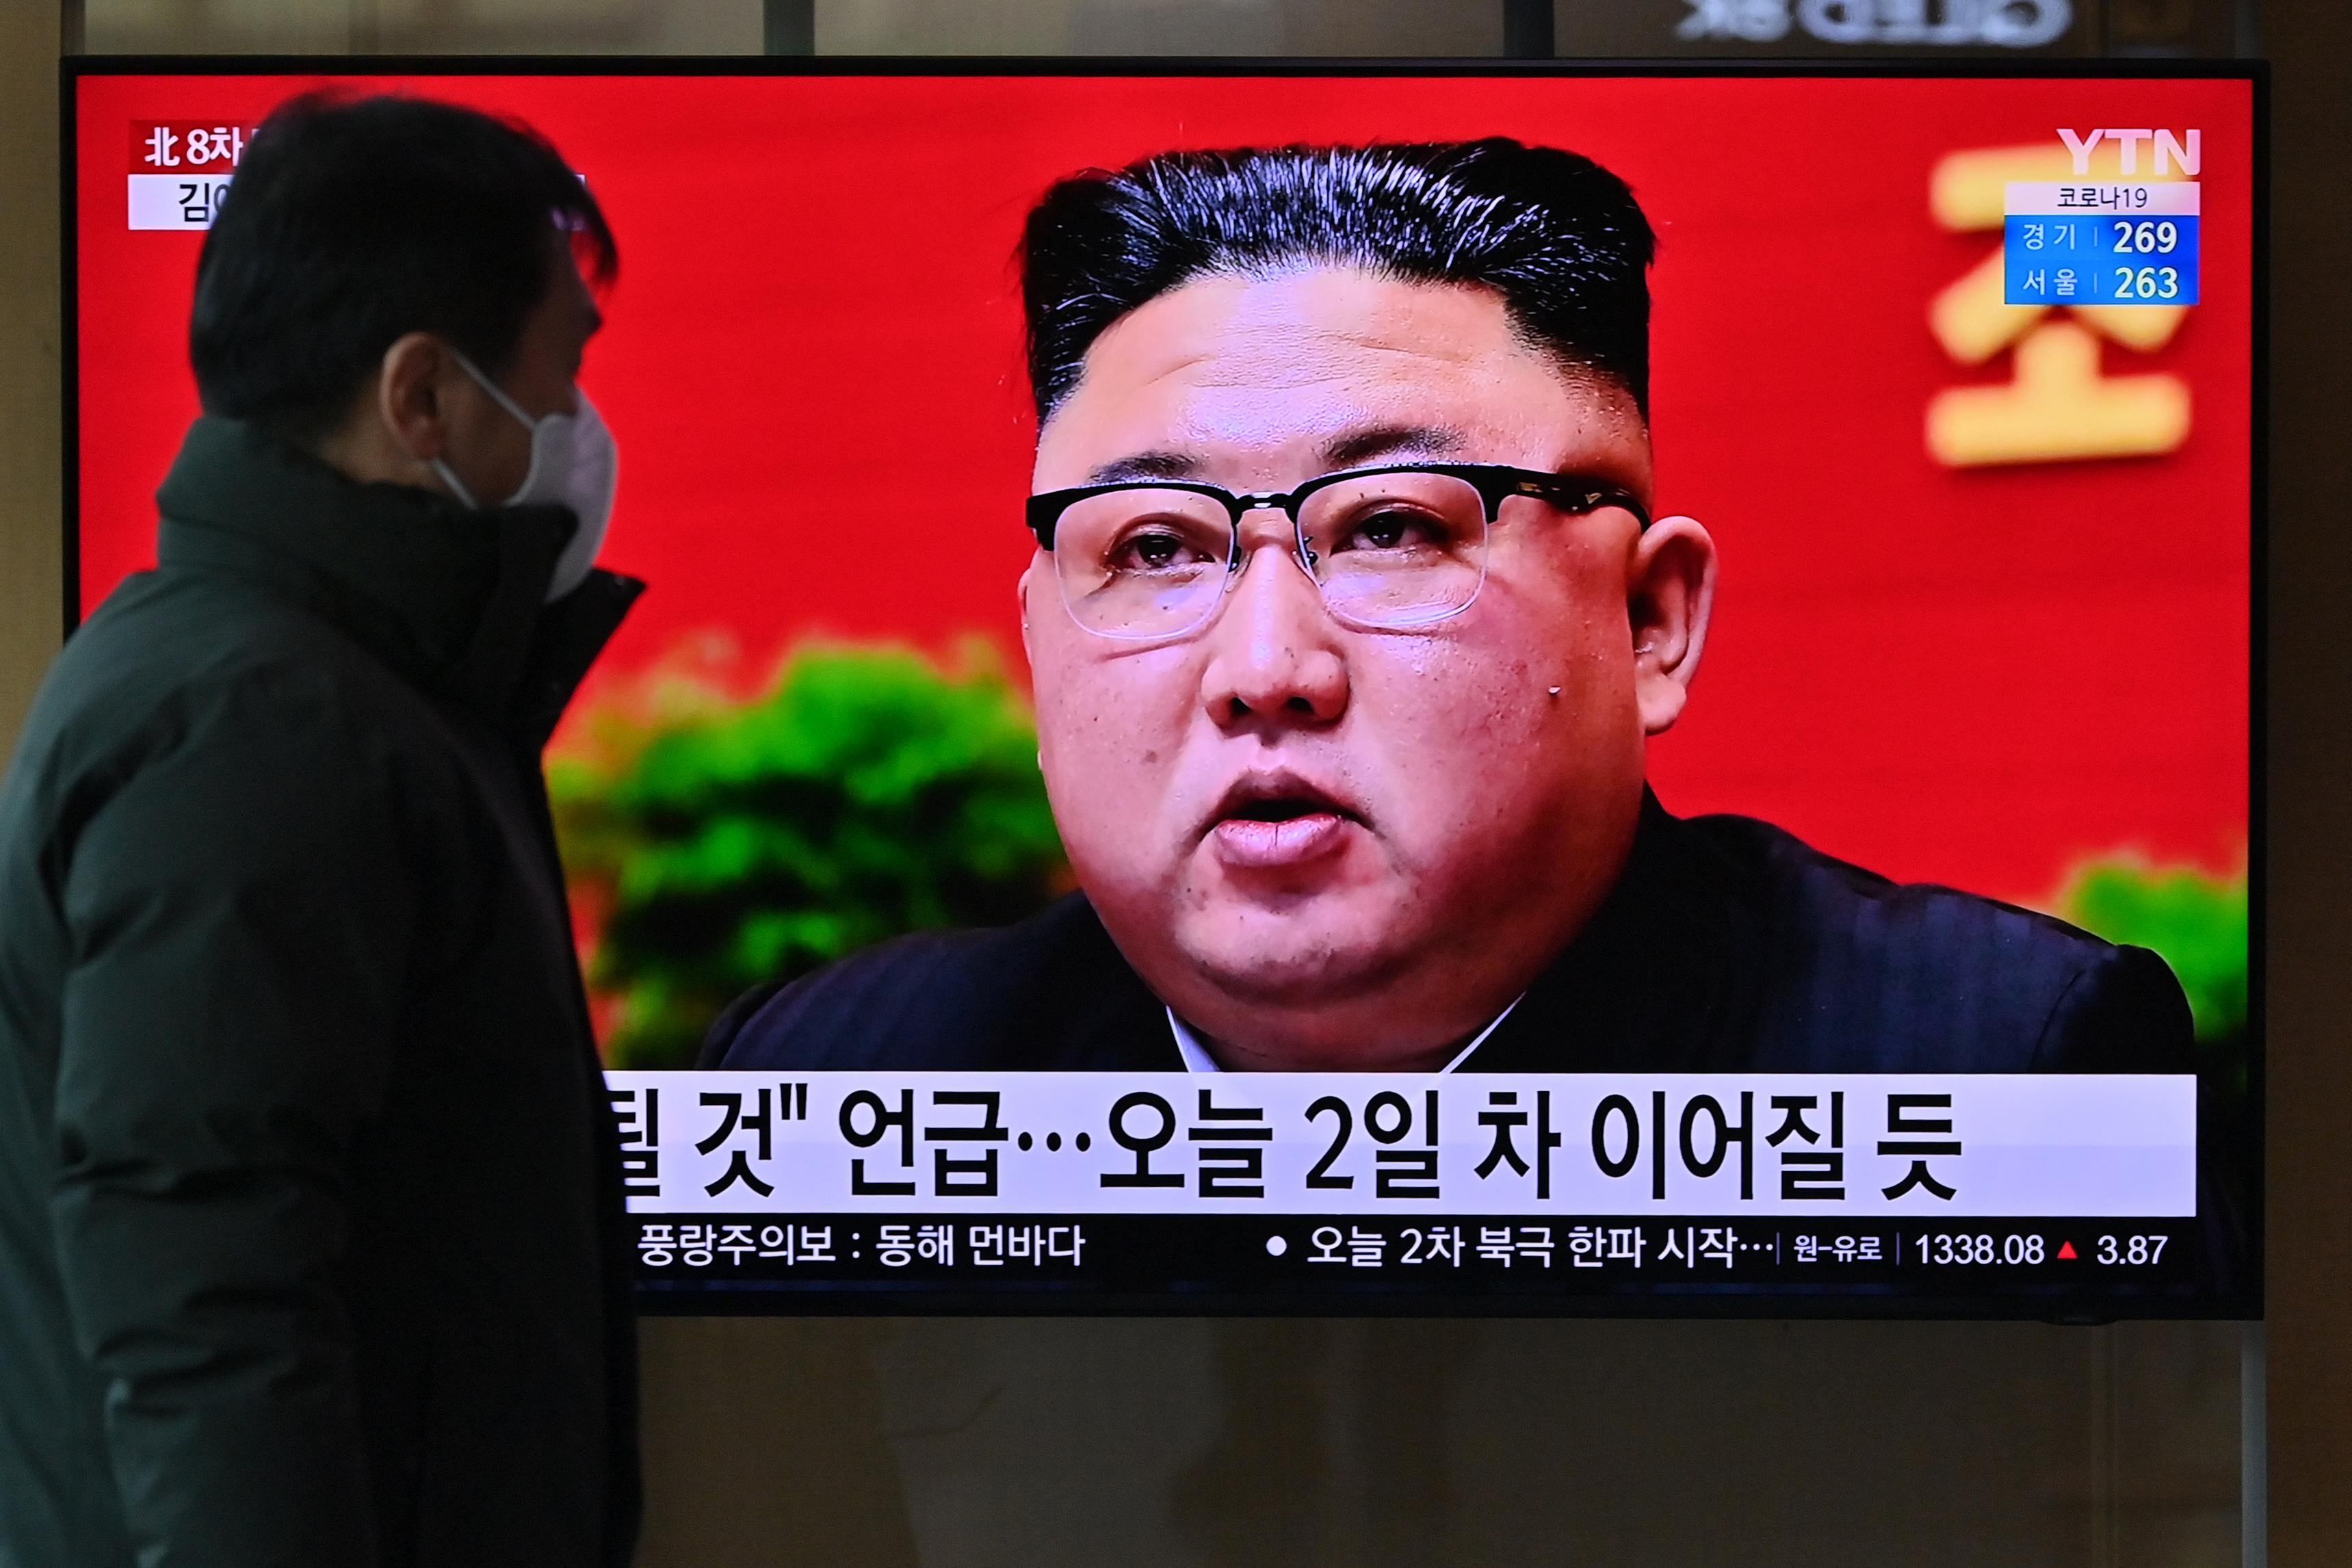 A man watches a television screen showing news footage of North Korean leader Kim Jong Un.